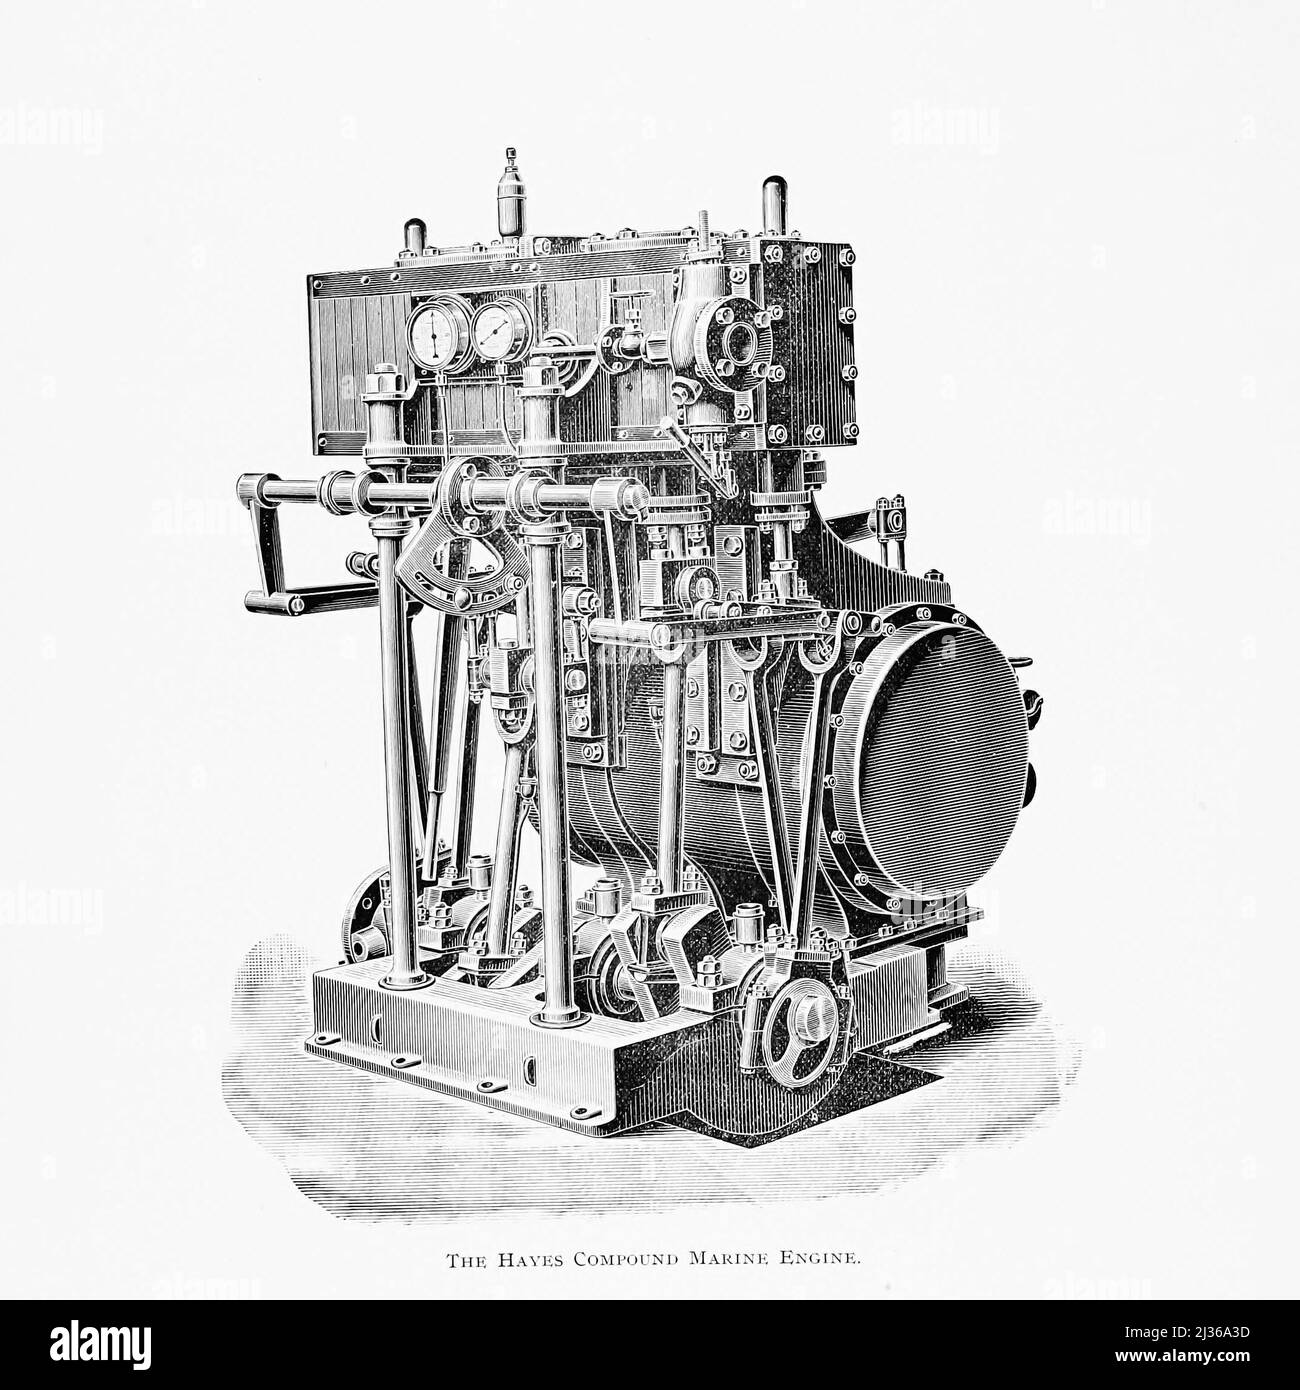 The Hayes Compound  Marine Engine from the book ' Steam vessels and marine engines ' by G. Foster Howell, Publisher New York : American Shipbuilder 1896 Stock Photo